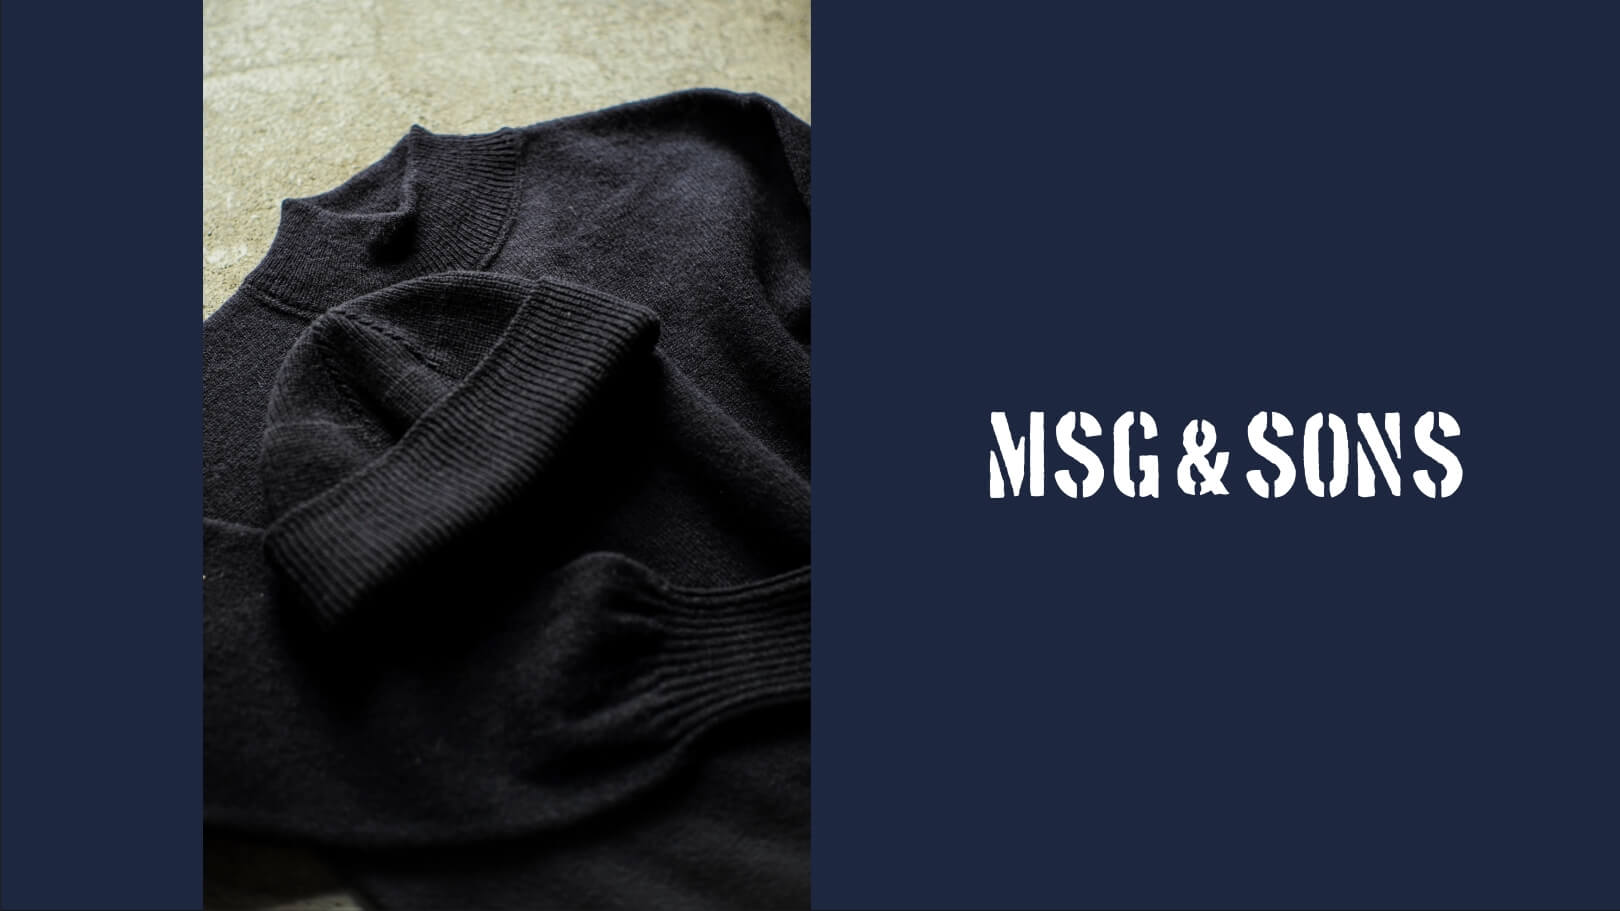 MSG & SONS US NAVY WATCH CAP & GOB SWEATER